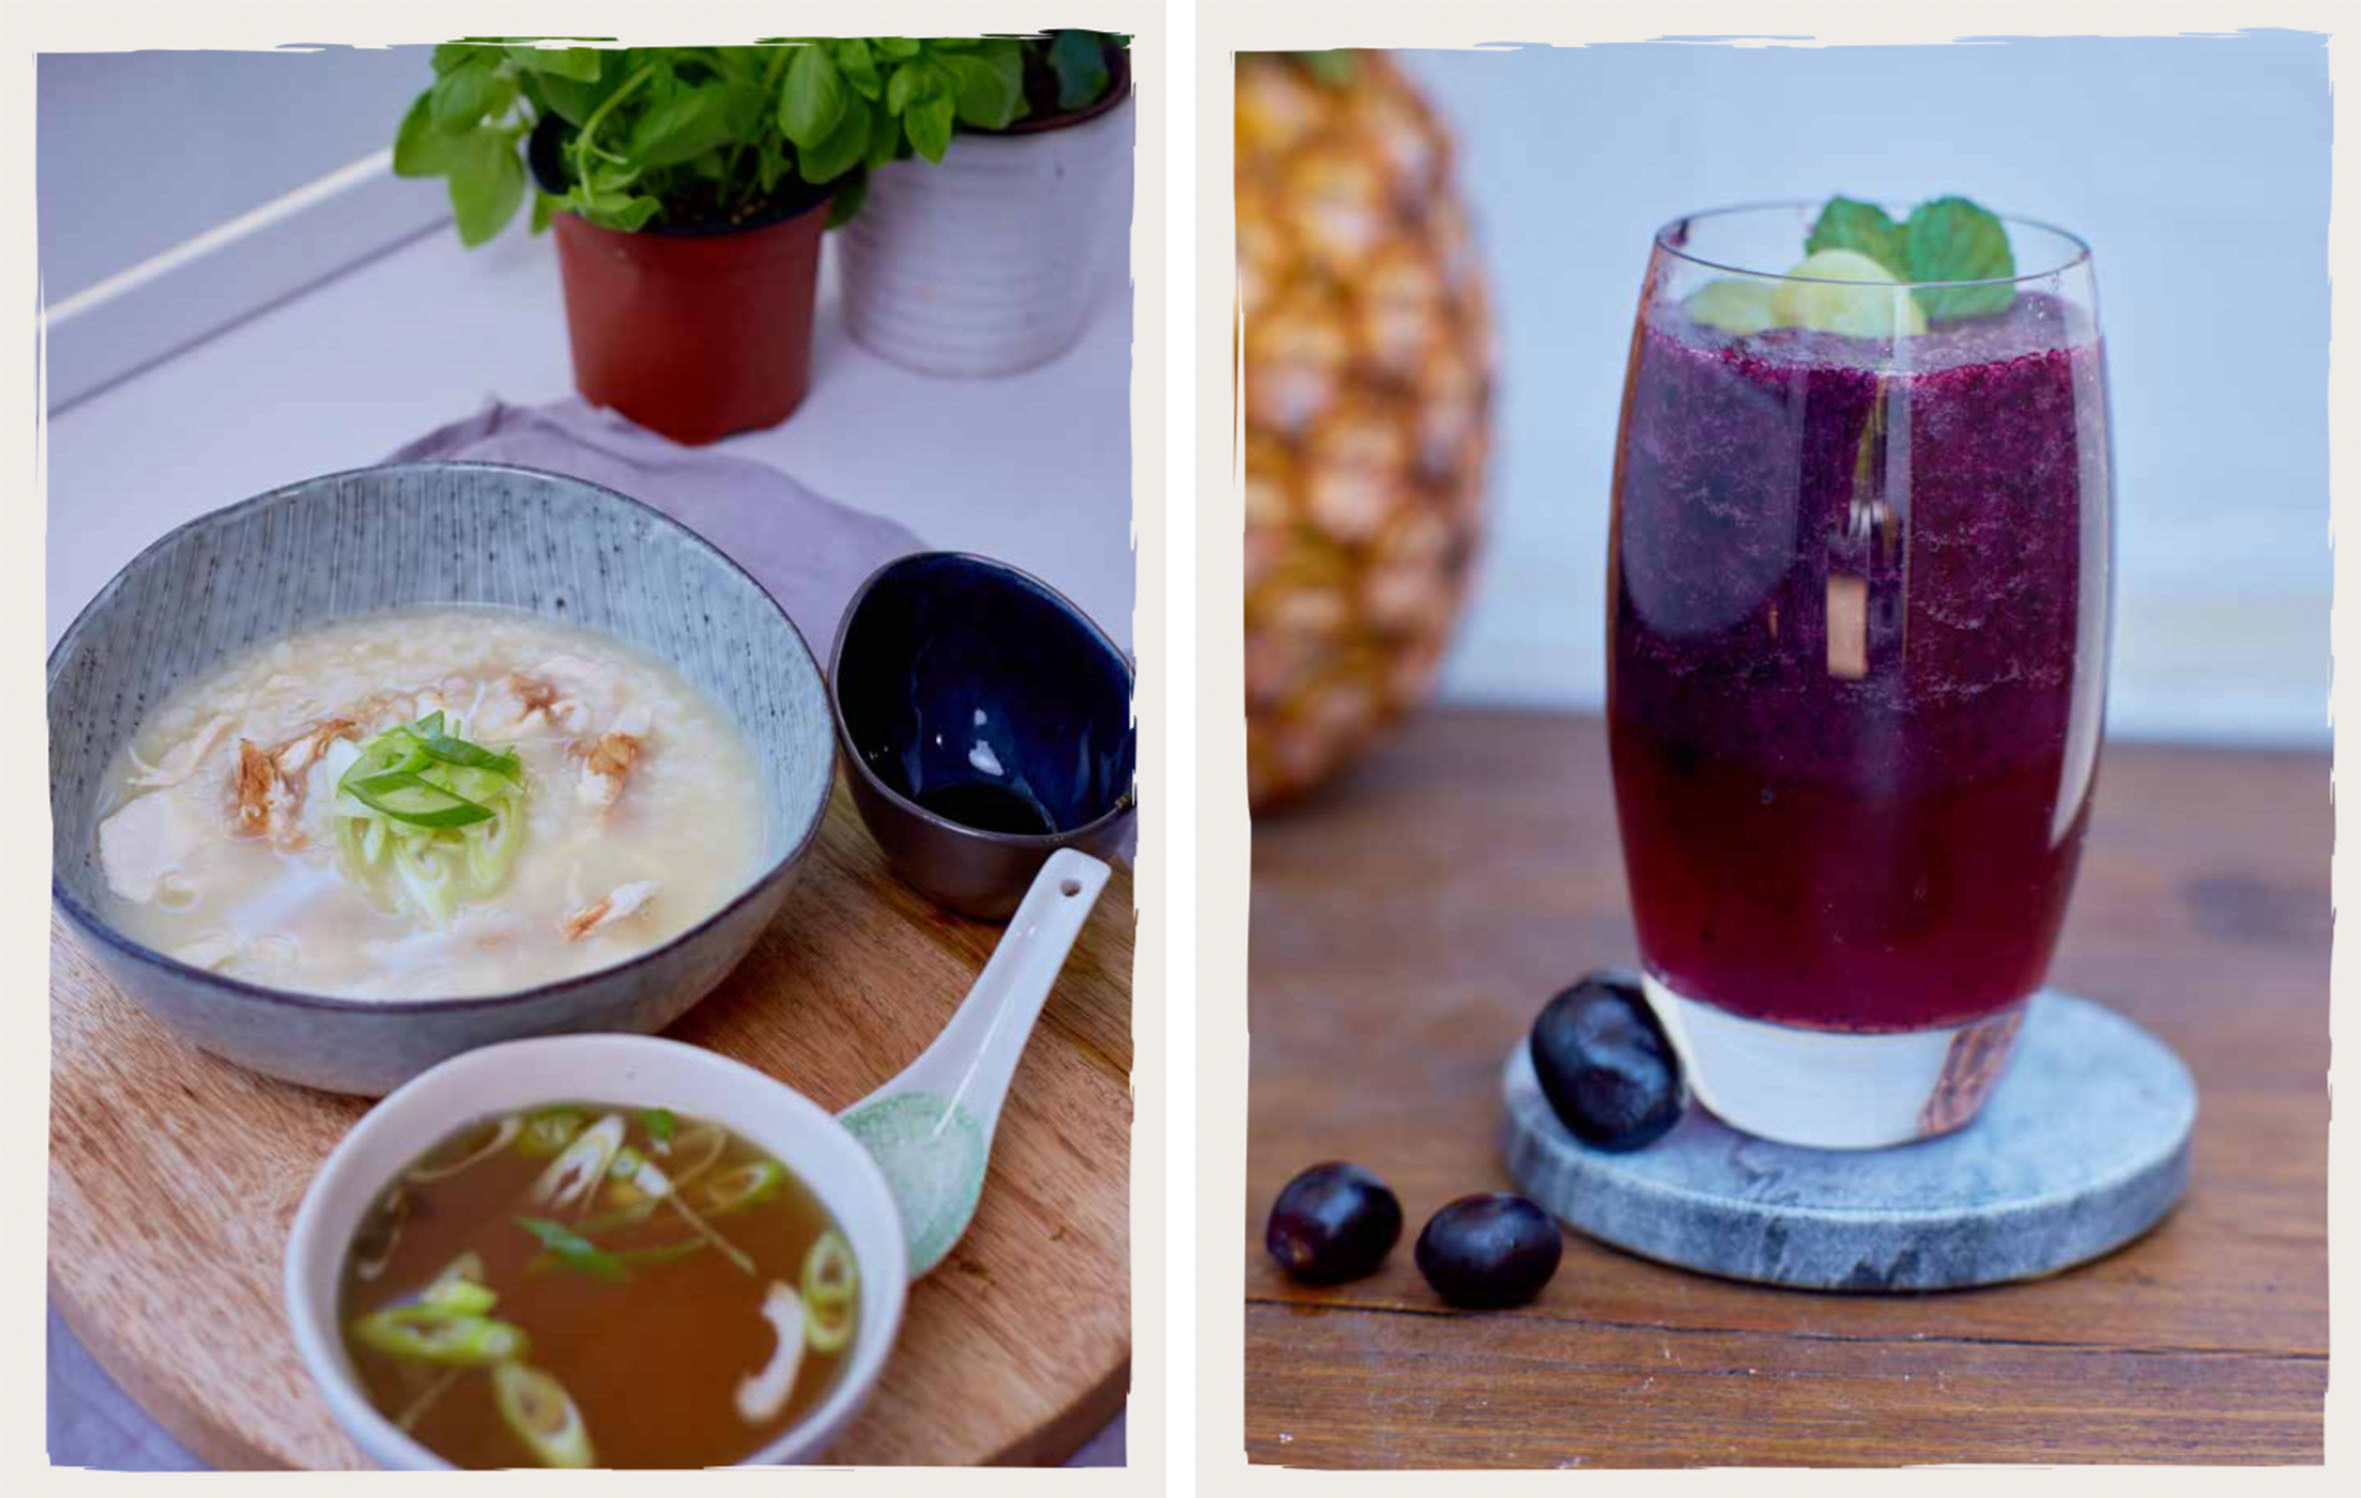 Left: shredded chicken and ginger congee. Right: a grape slushy. Both recipes come from Peter Morgan-Jones, executive chef at the HammondCare Foundation in Australia. He believes the visual impression a food makes is essential.